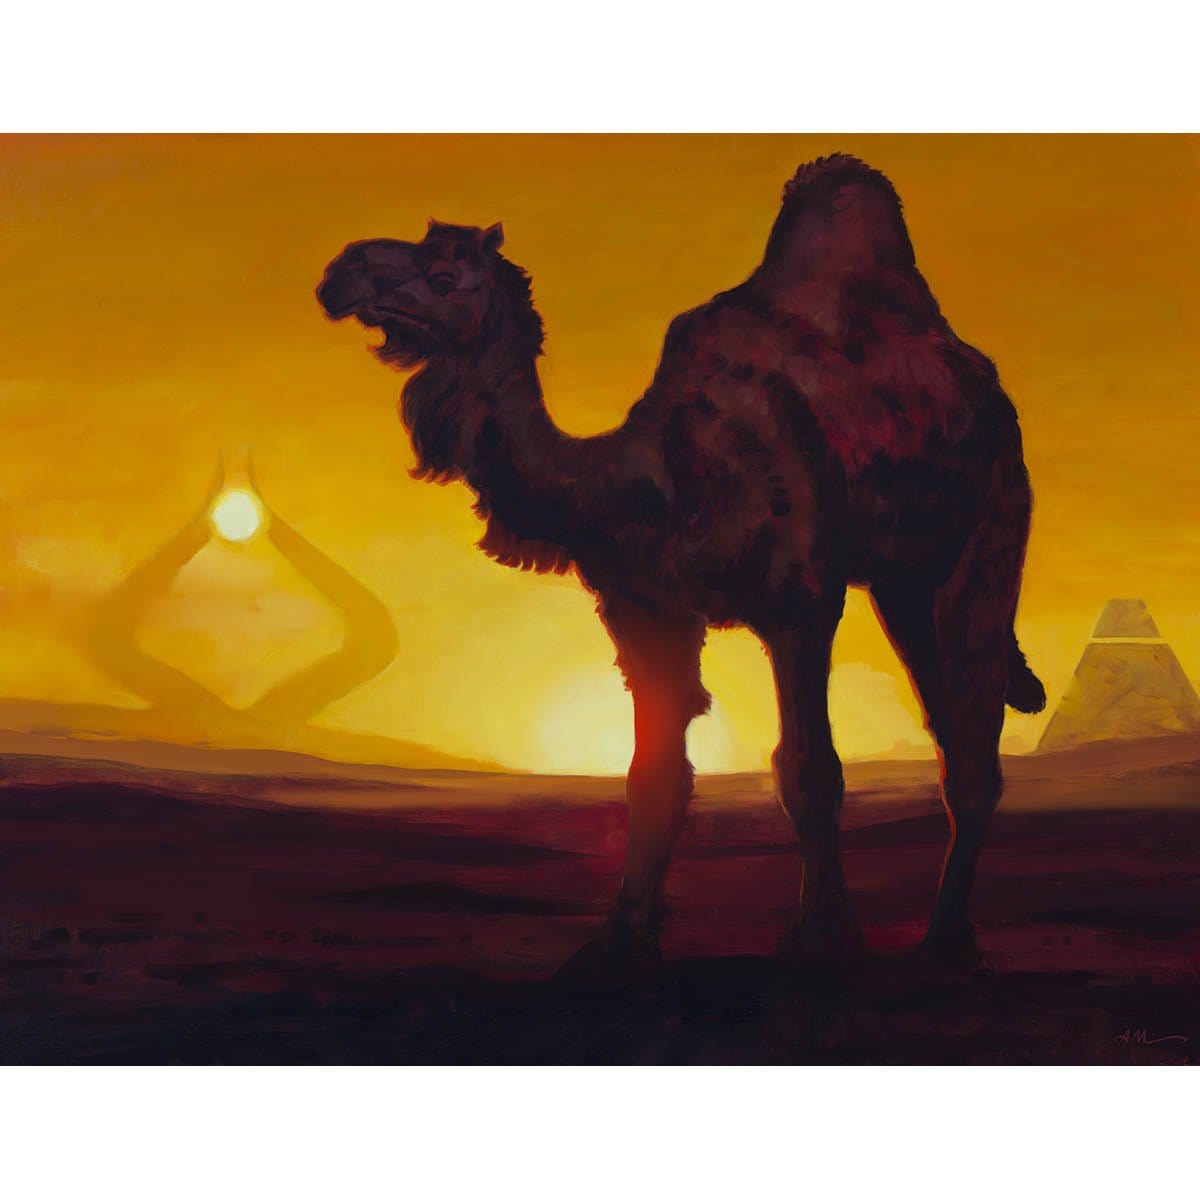 Solitary Camel Print - Print - Original Magic Art - Accessories for Magic the Gathering and other card games